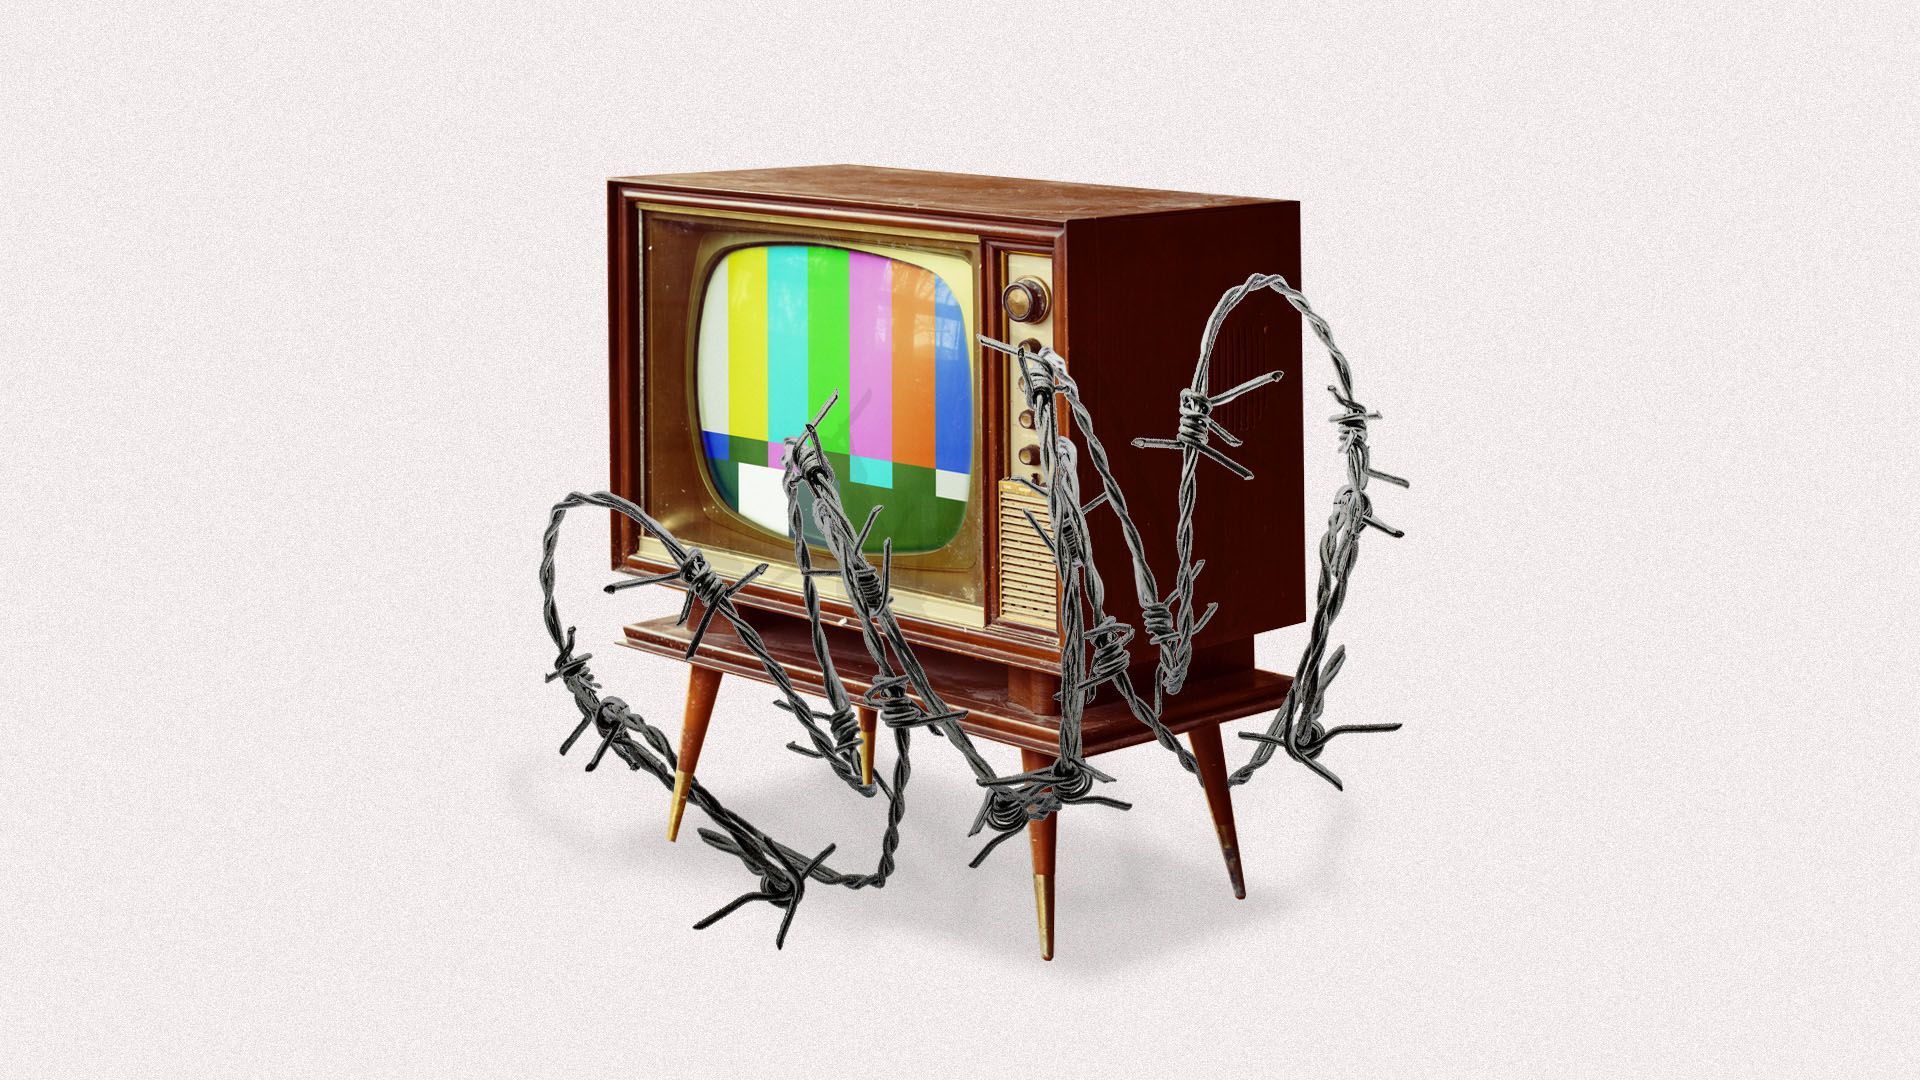 Illustration of a TV covered in barb wire